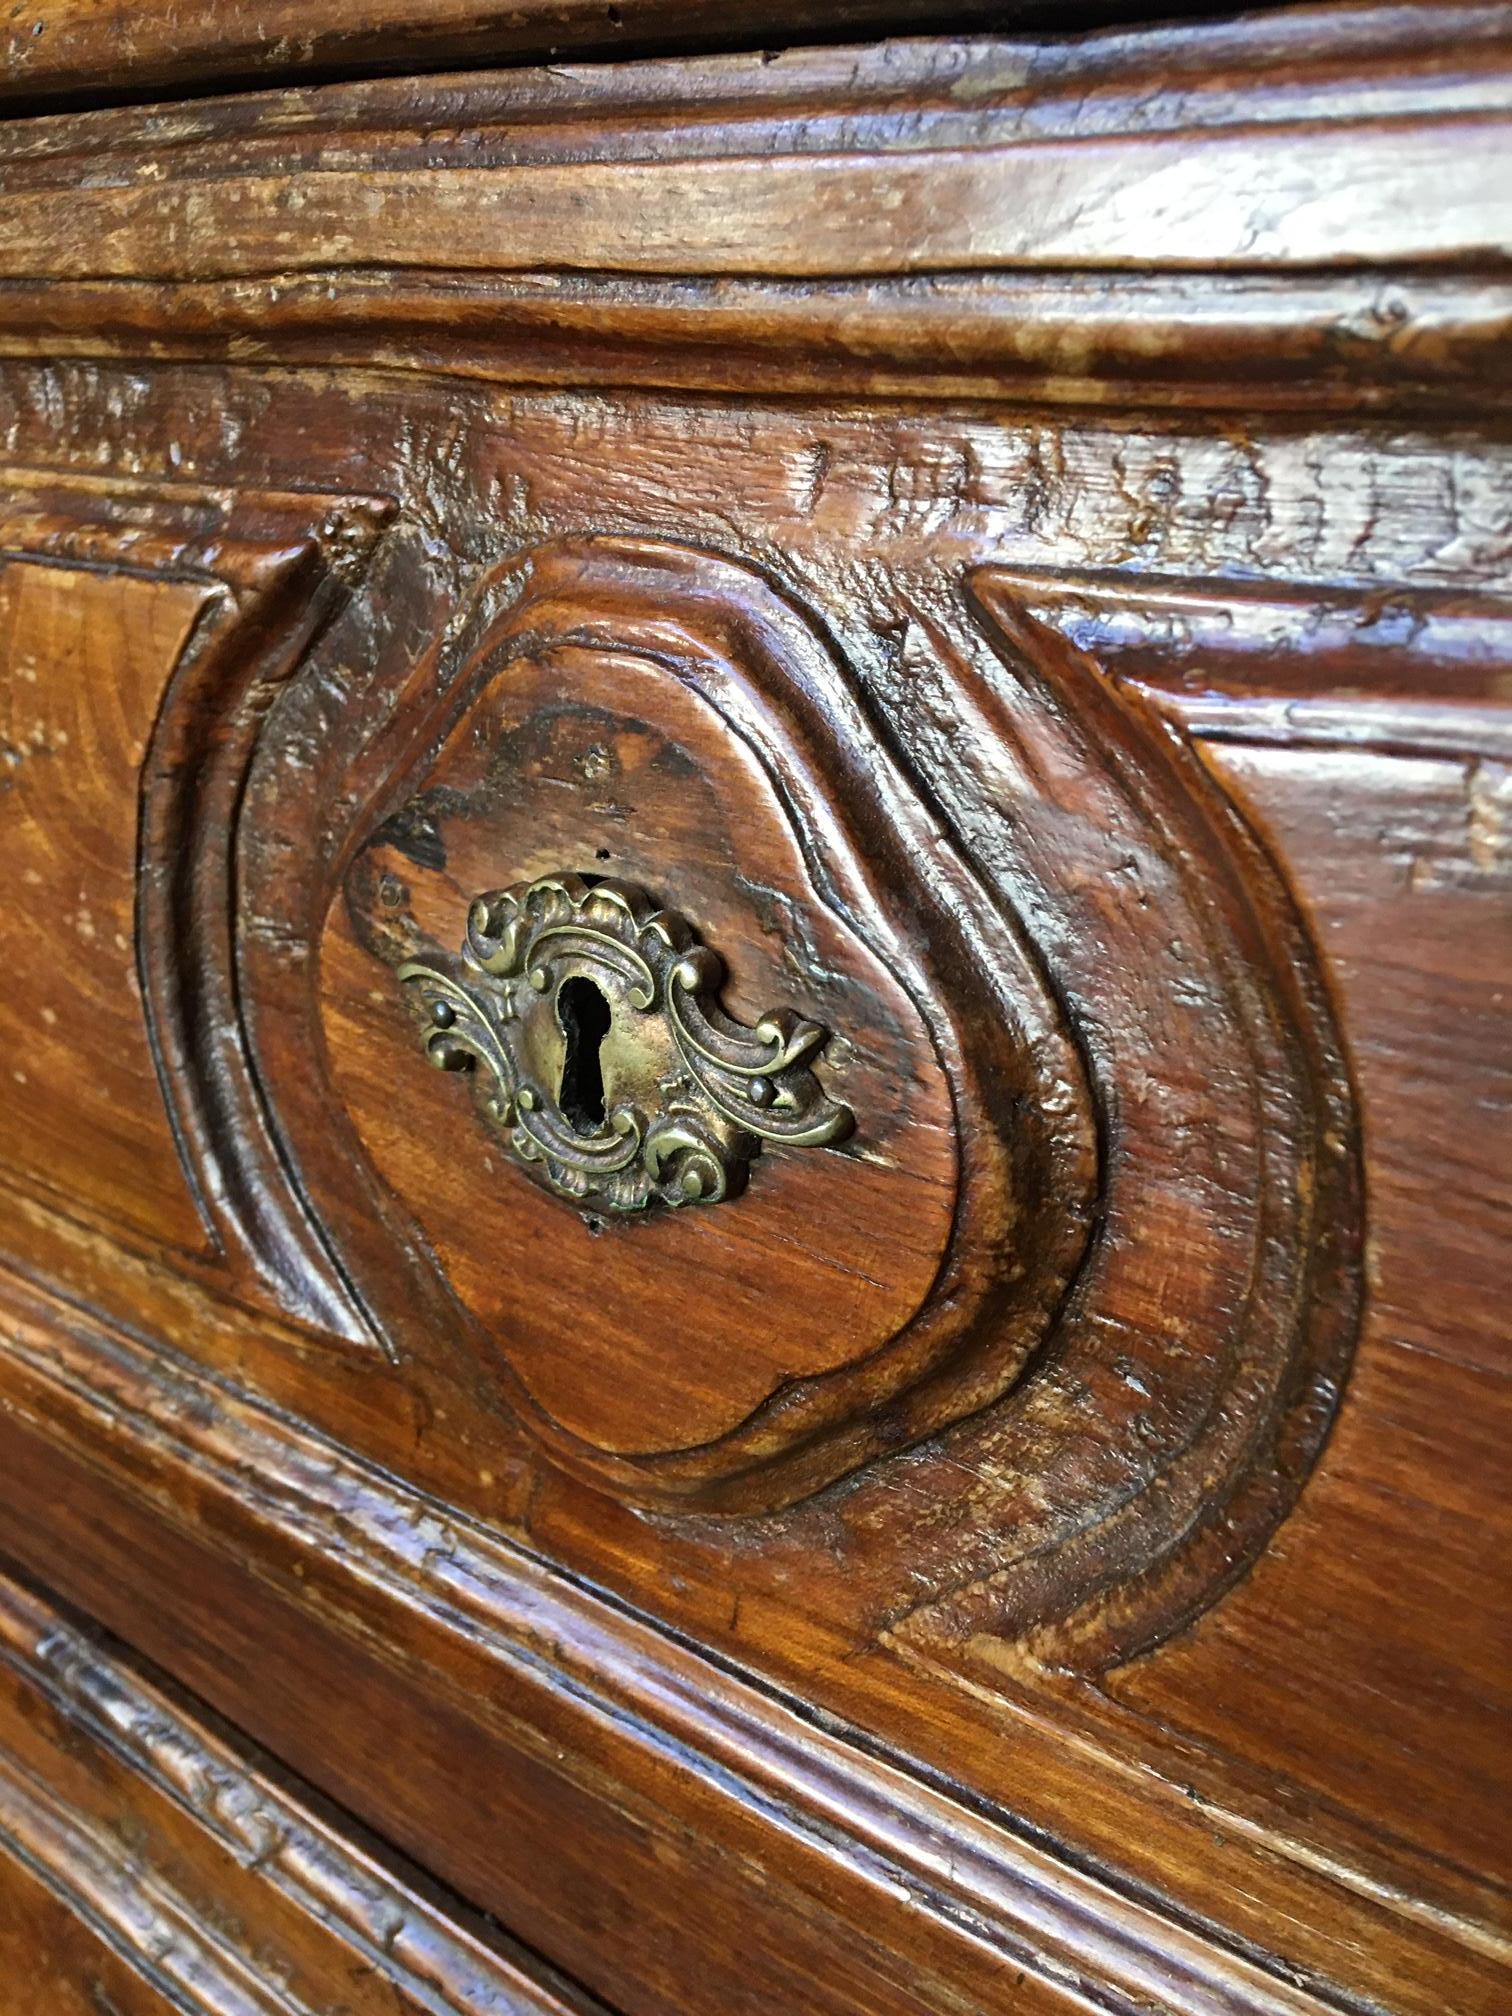 Mid 18th Century French Provincial Carved Walnut Commode or Chest of Drawers In Good Condition For Sale In Savannah, GA